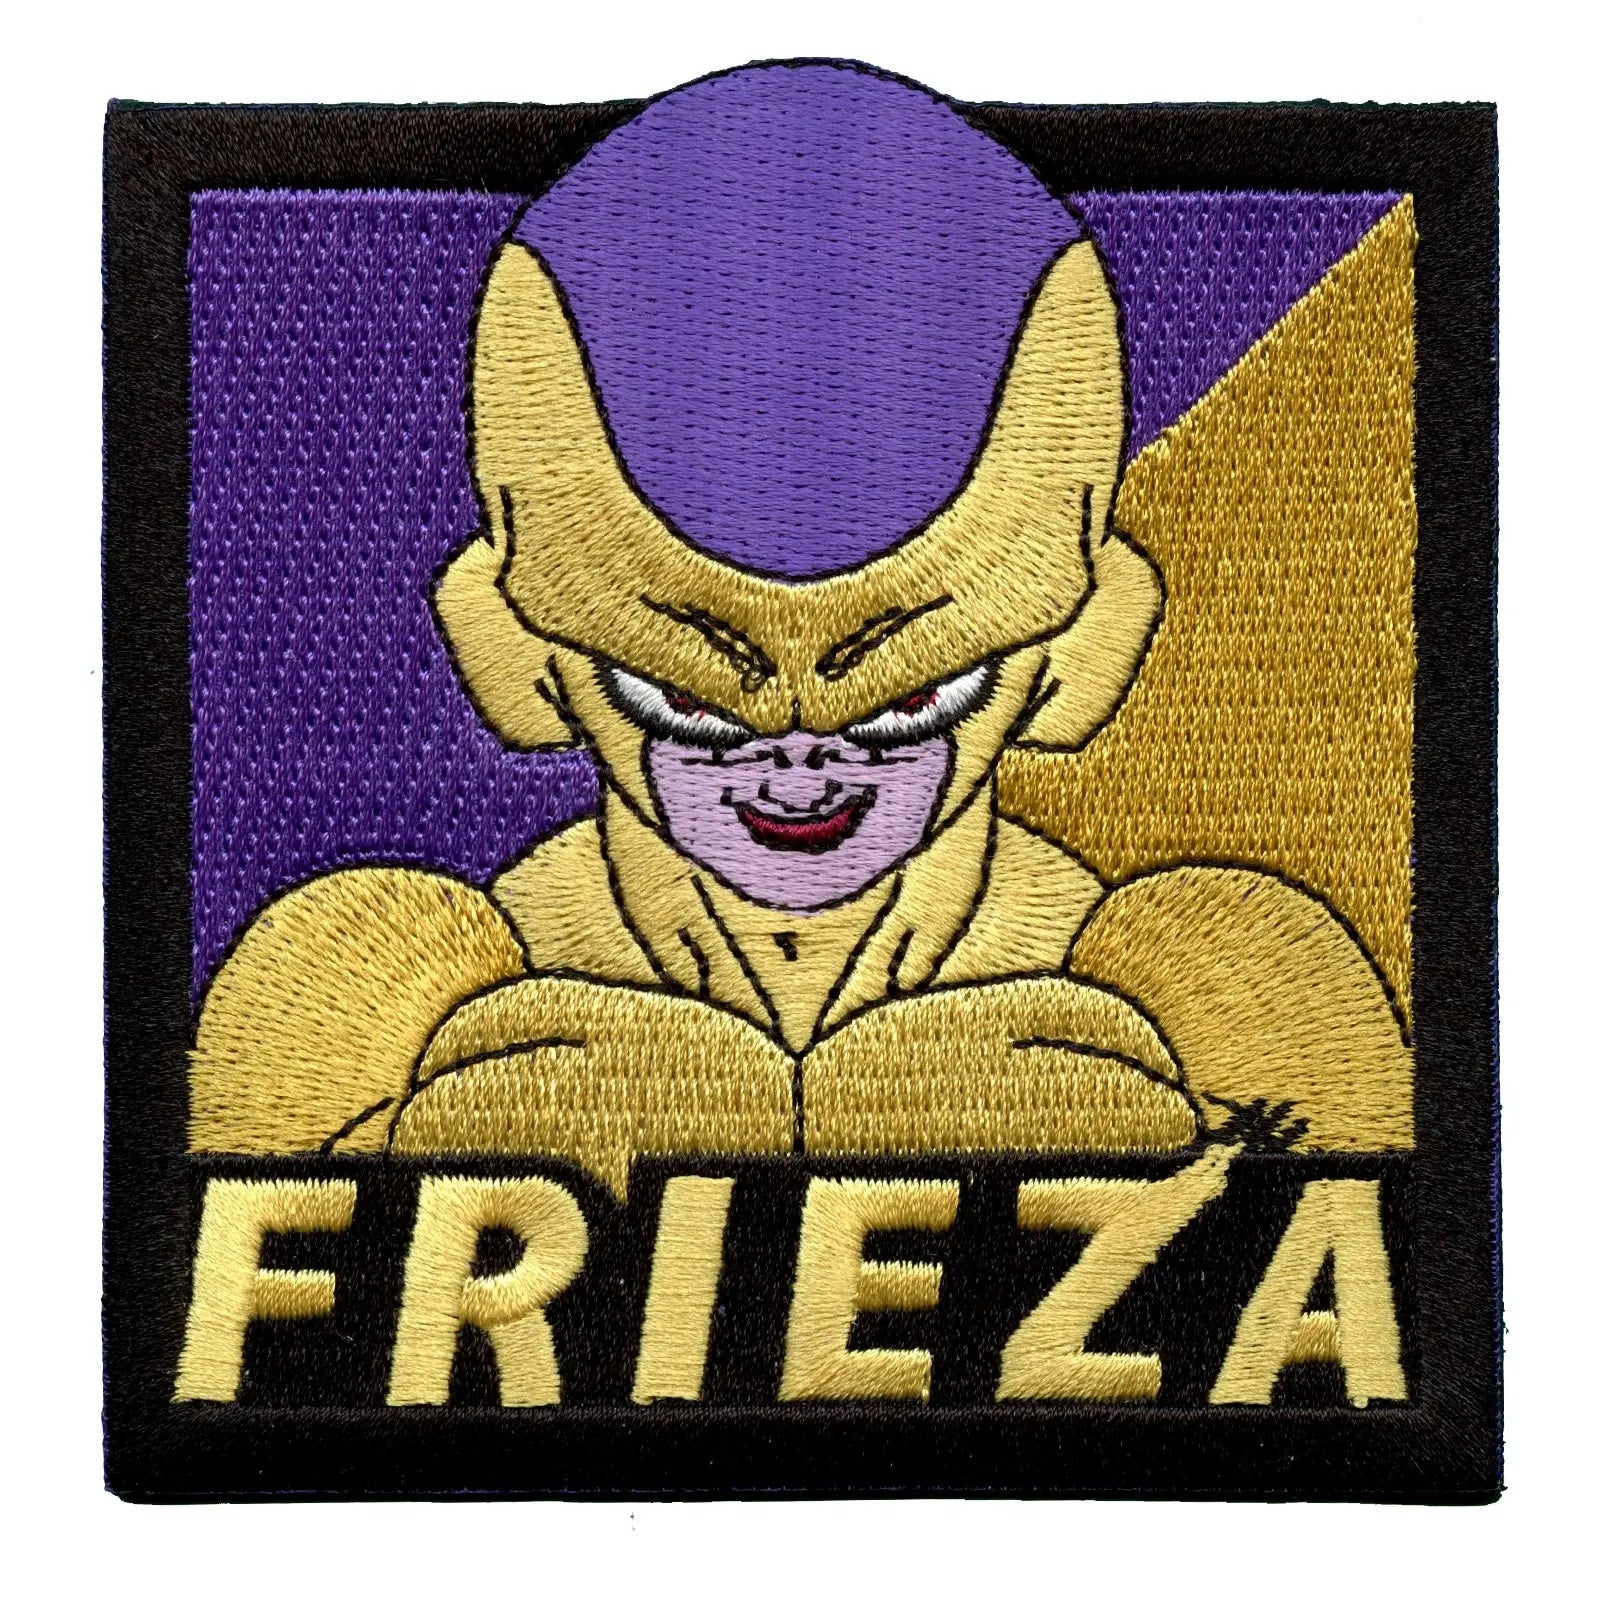 Dragon Ball Super Broly SSGSS Frieza Anime Square Embroidered Patch 